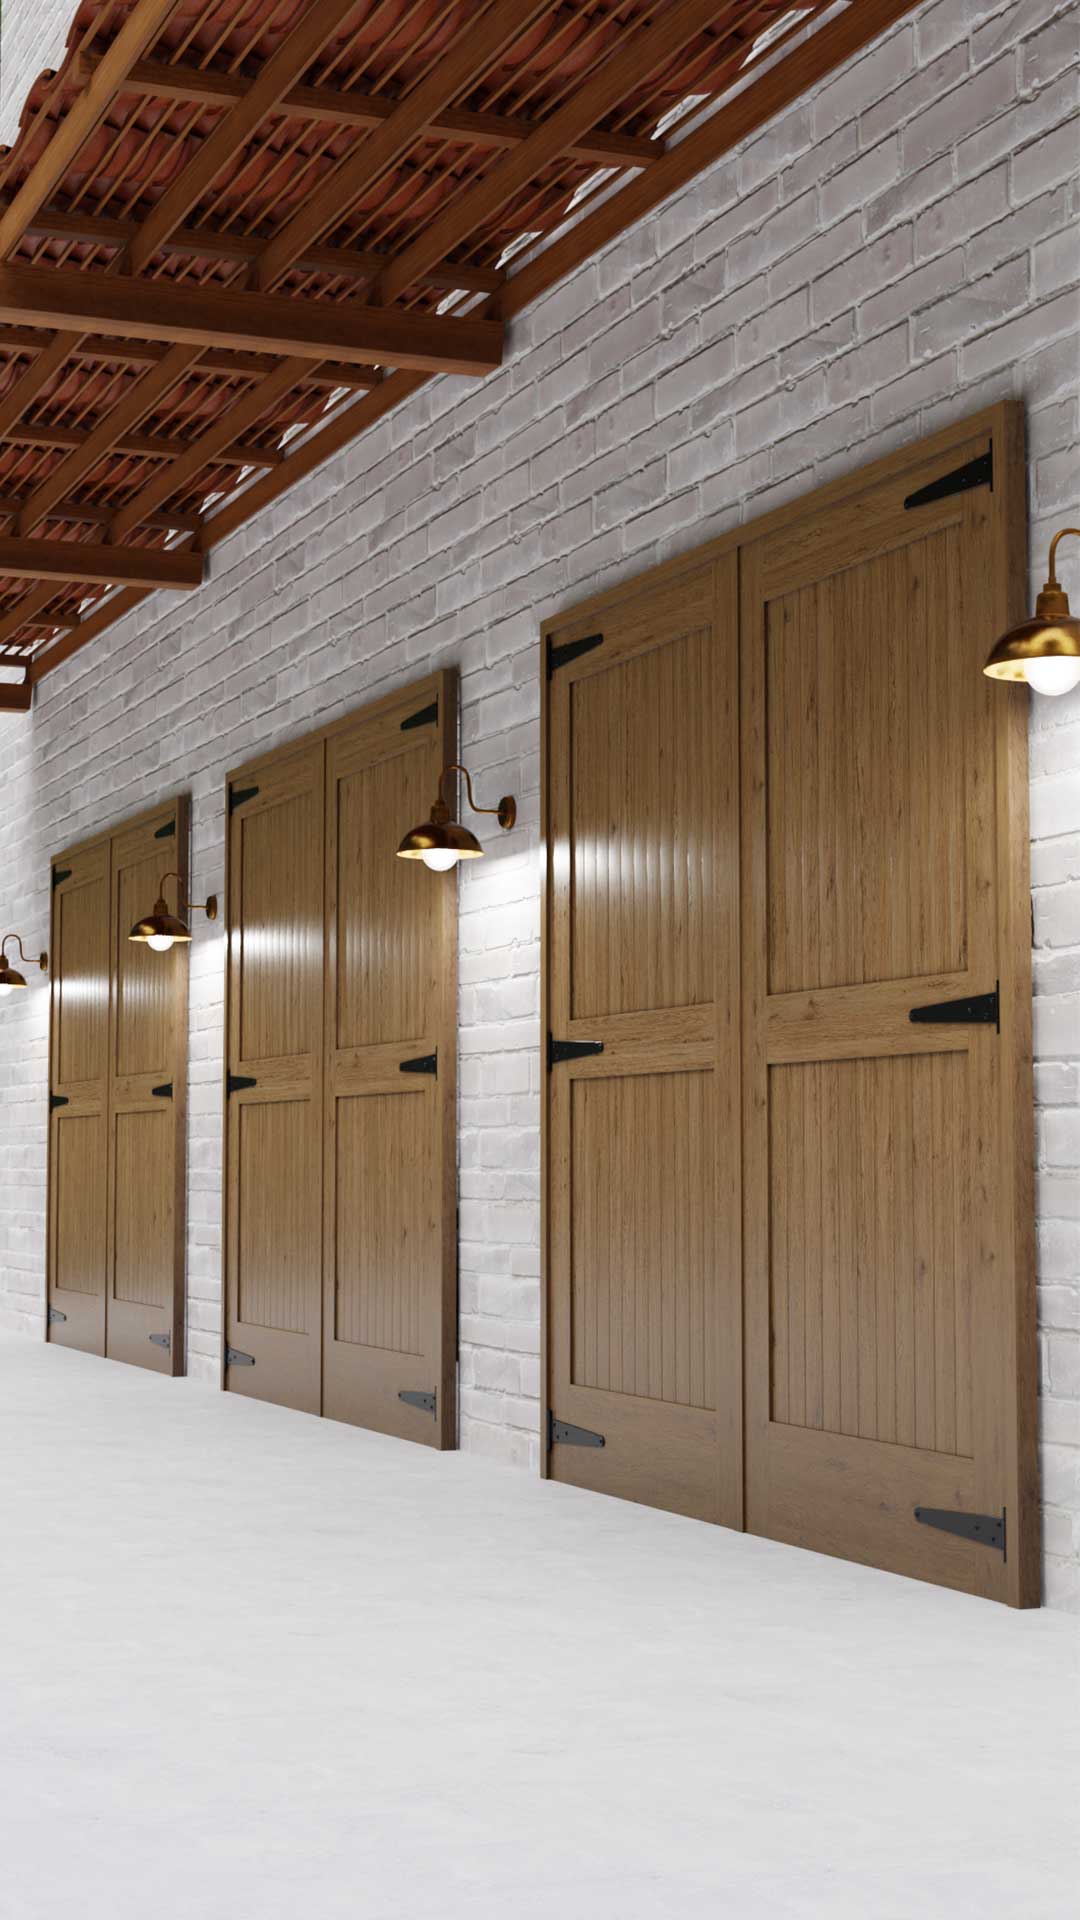 three outswing carriage style garage doors in a white brick wall